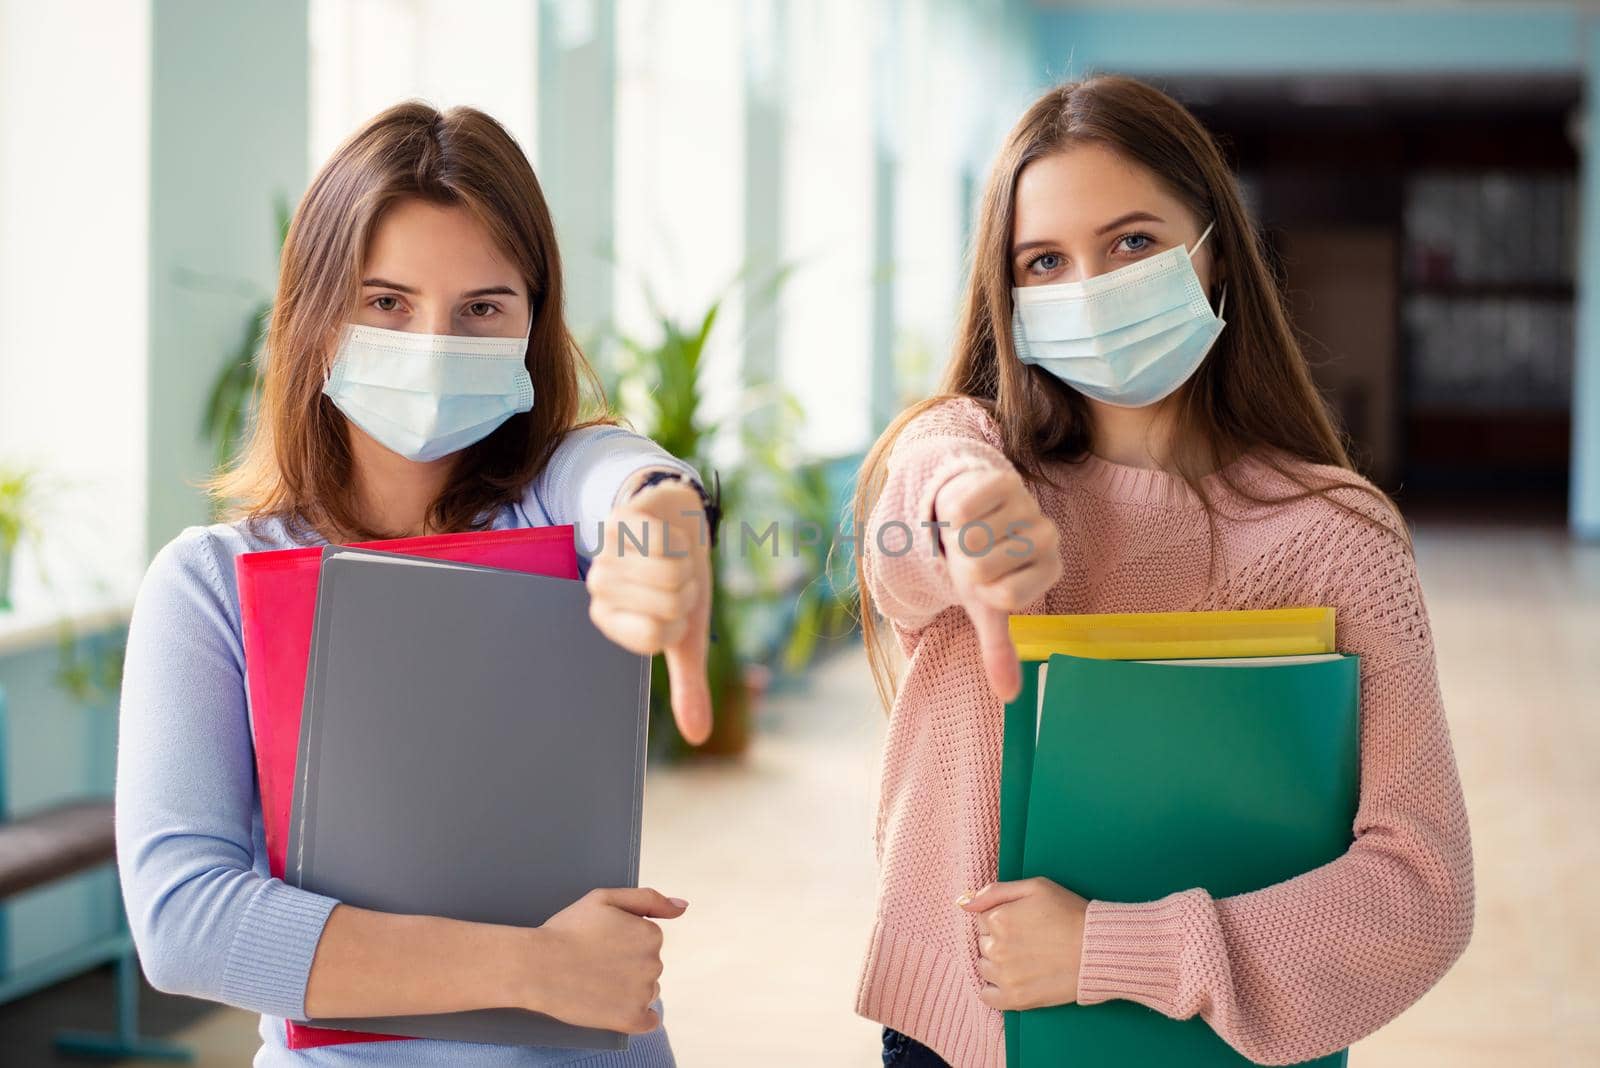 Students sick and tired of safety rules and wearing medical masks while education during Covid-19 pandemic